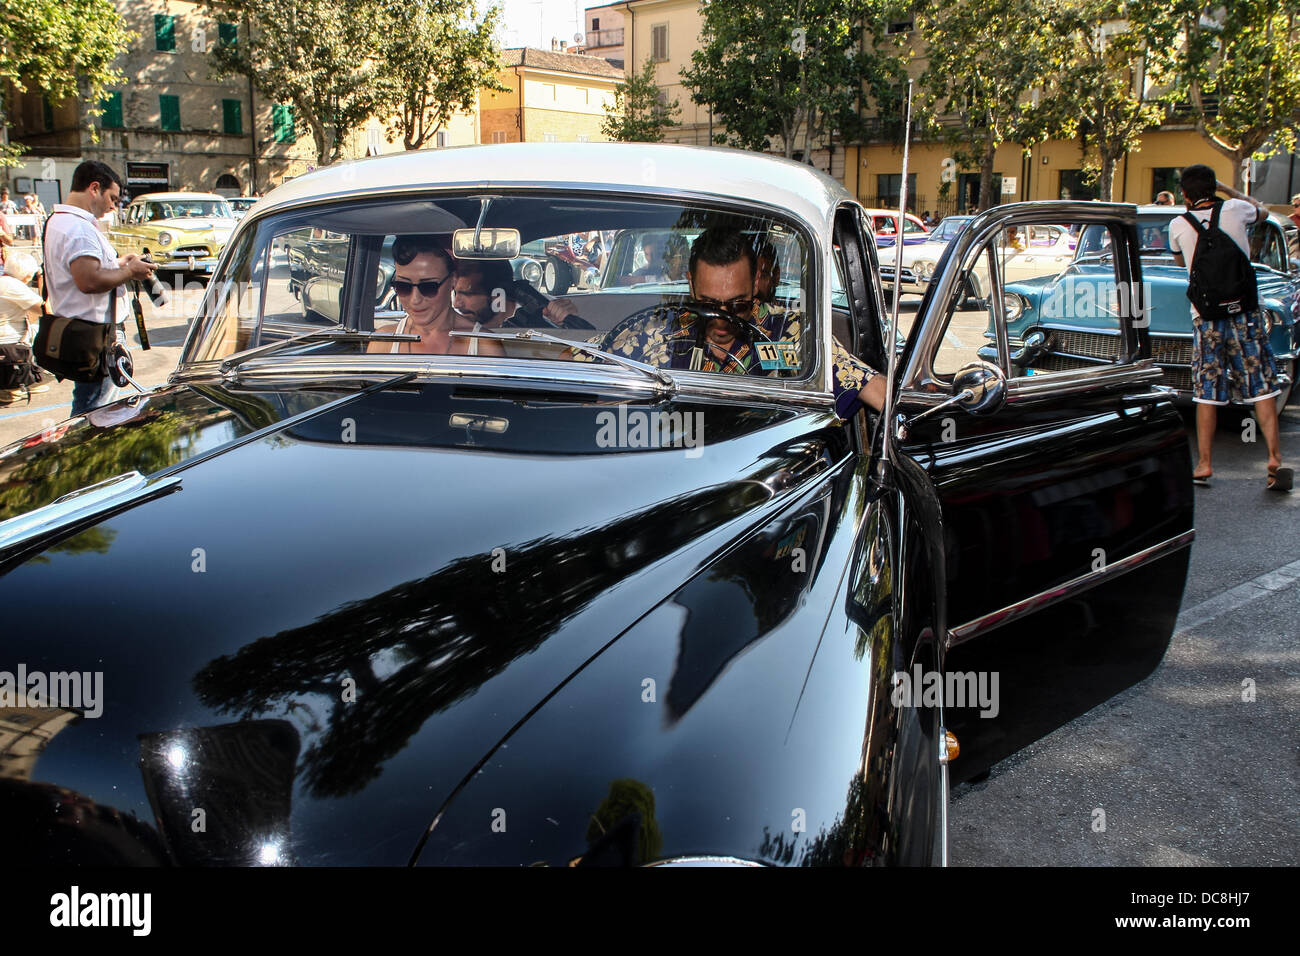 Senigallia, Italy. 10th August, 2013. Summer Jamboree 6th day  [International Festival 60's revival Rock & Roll] OLD USA Car parade in Senigallia, Italy on Aug 10, 2013. Credit:  Valerio Agolino/Alamy Live News Stock Photo